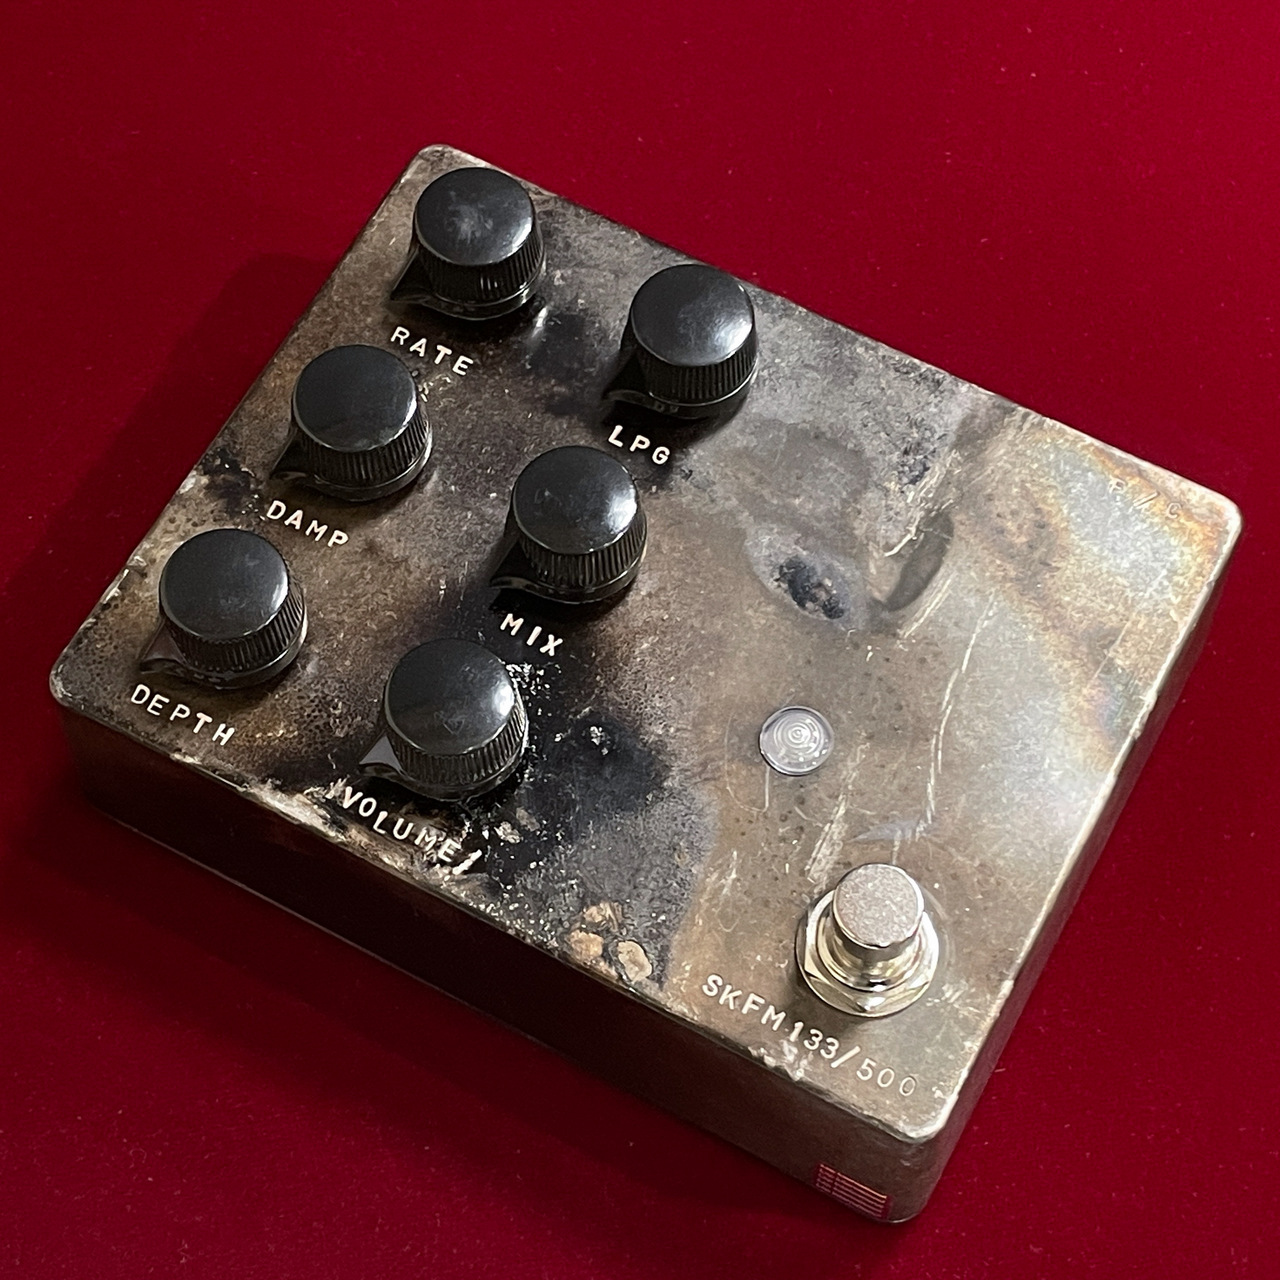 Fairfield Circuitry Shallow Water Limited Model 【限定バージョン ...